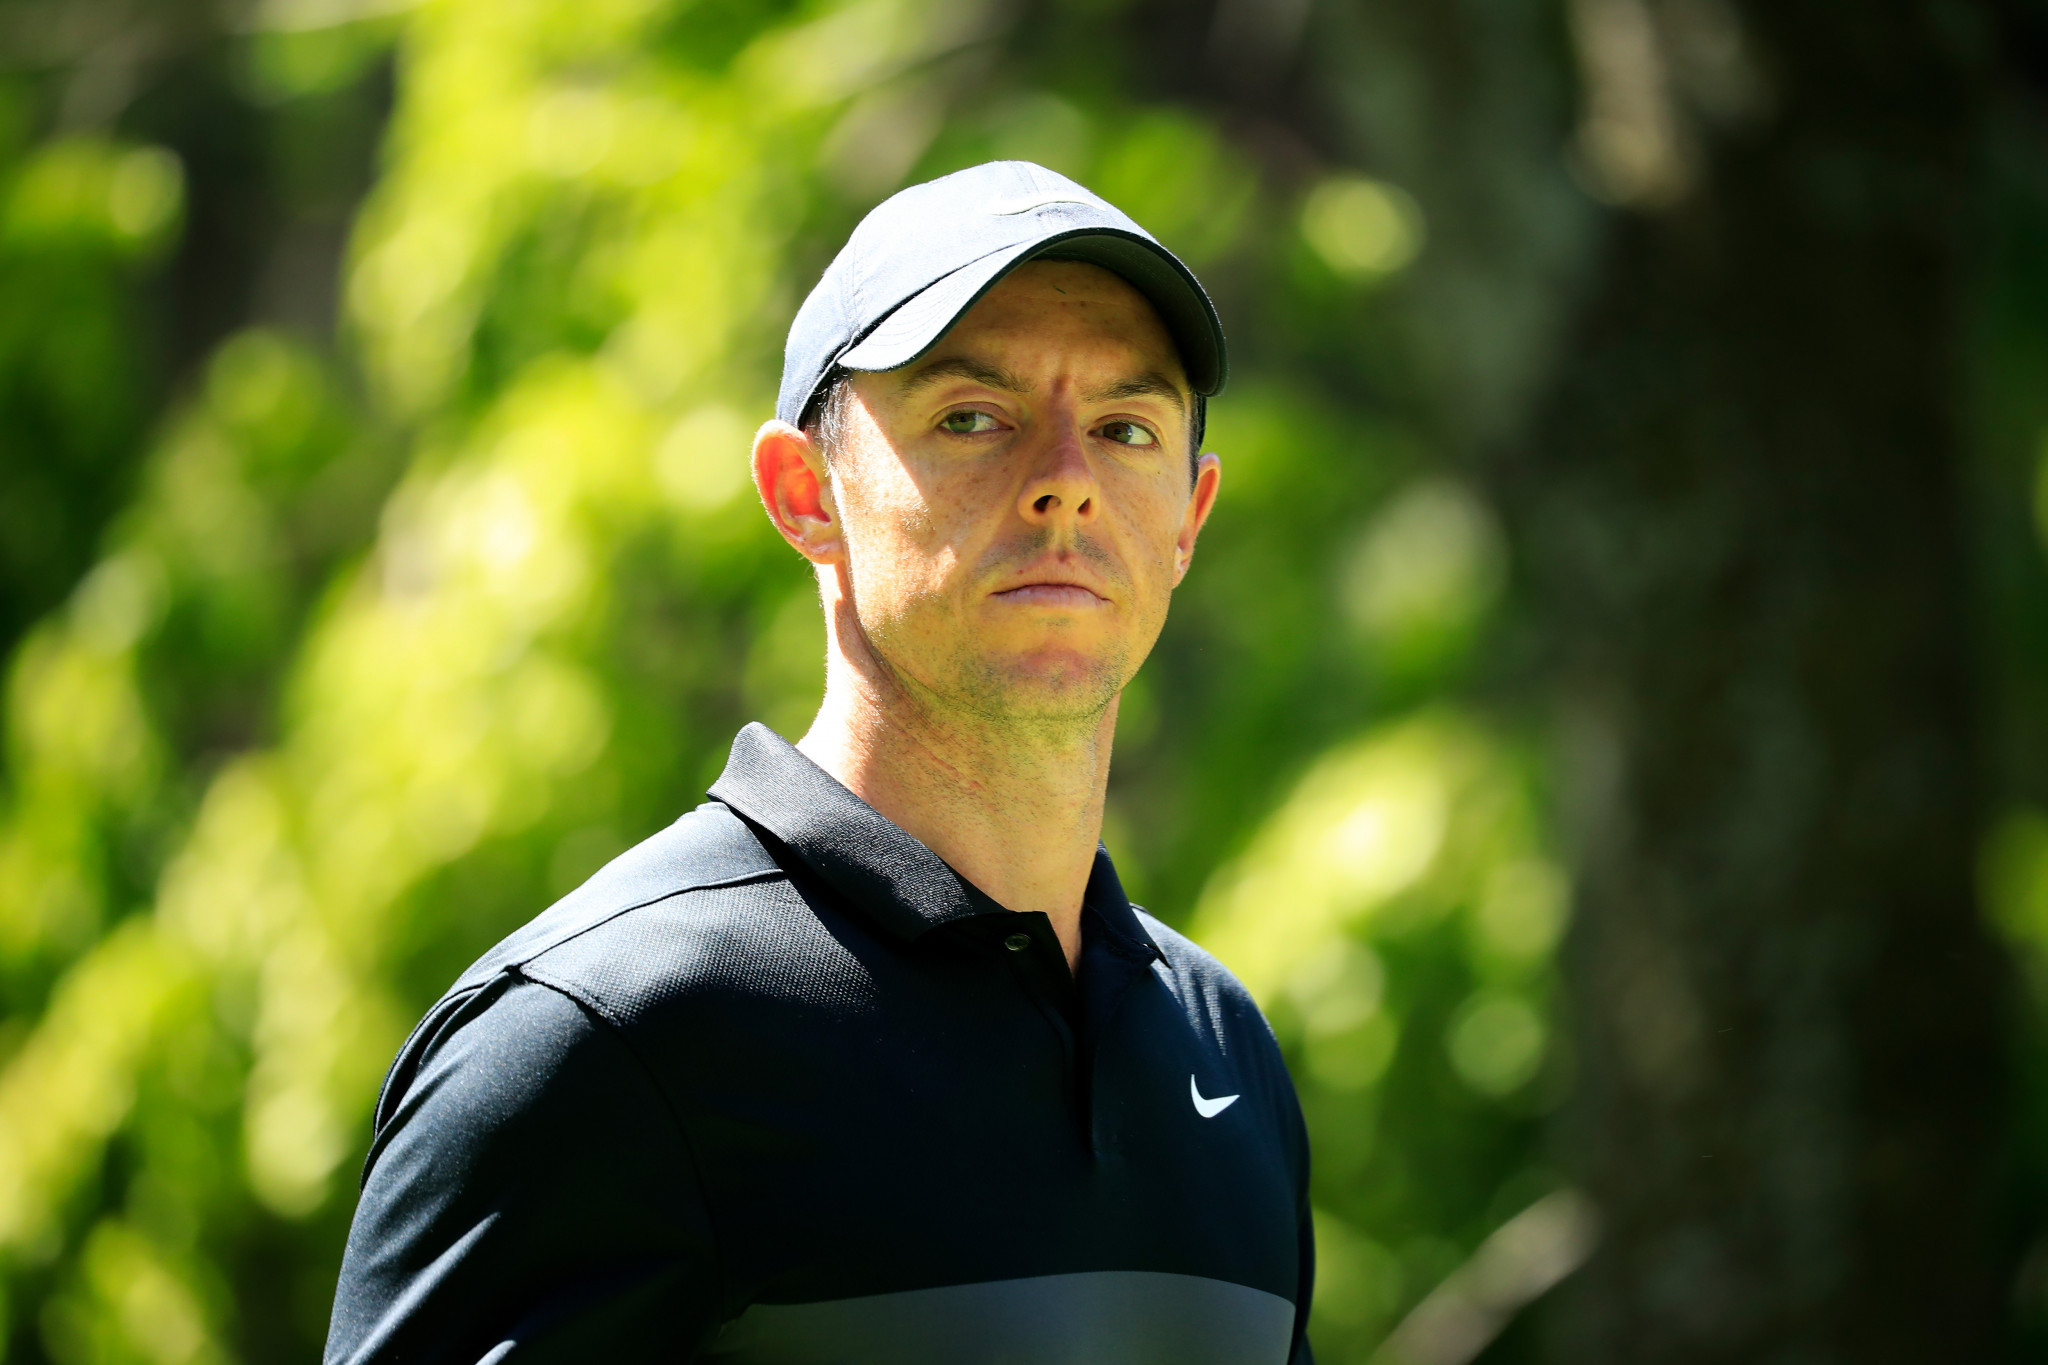 McIlroy takes early lead at WGC-Mexico Championship